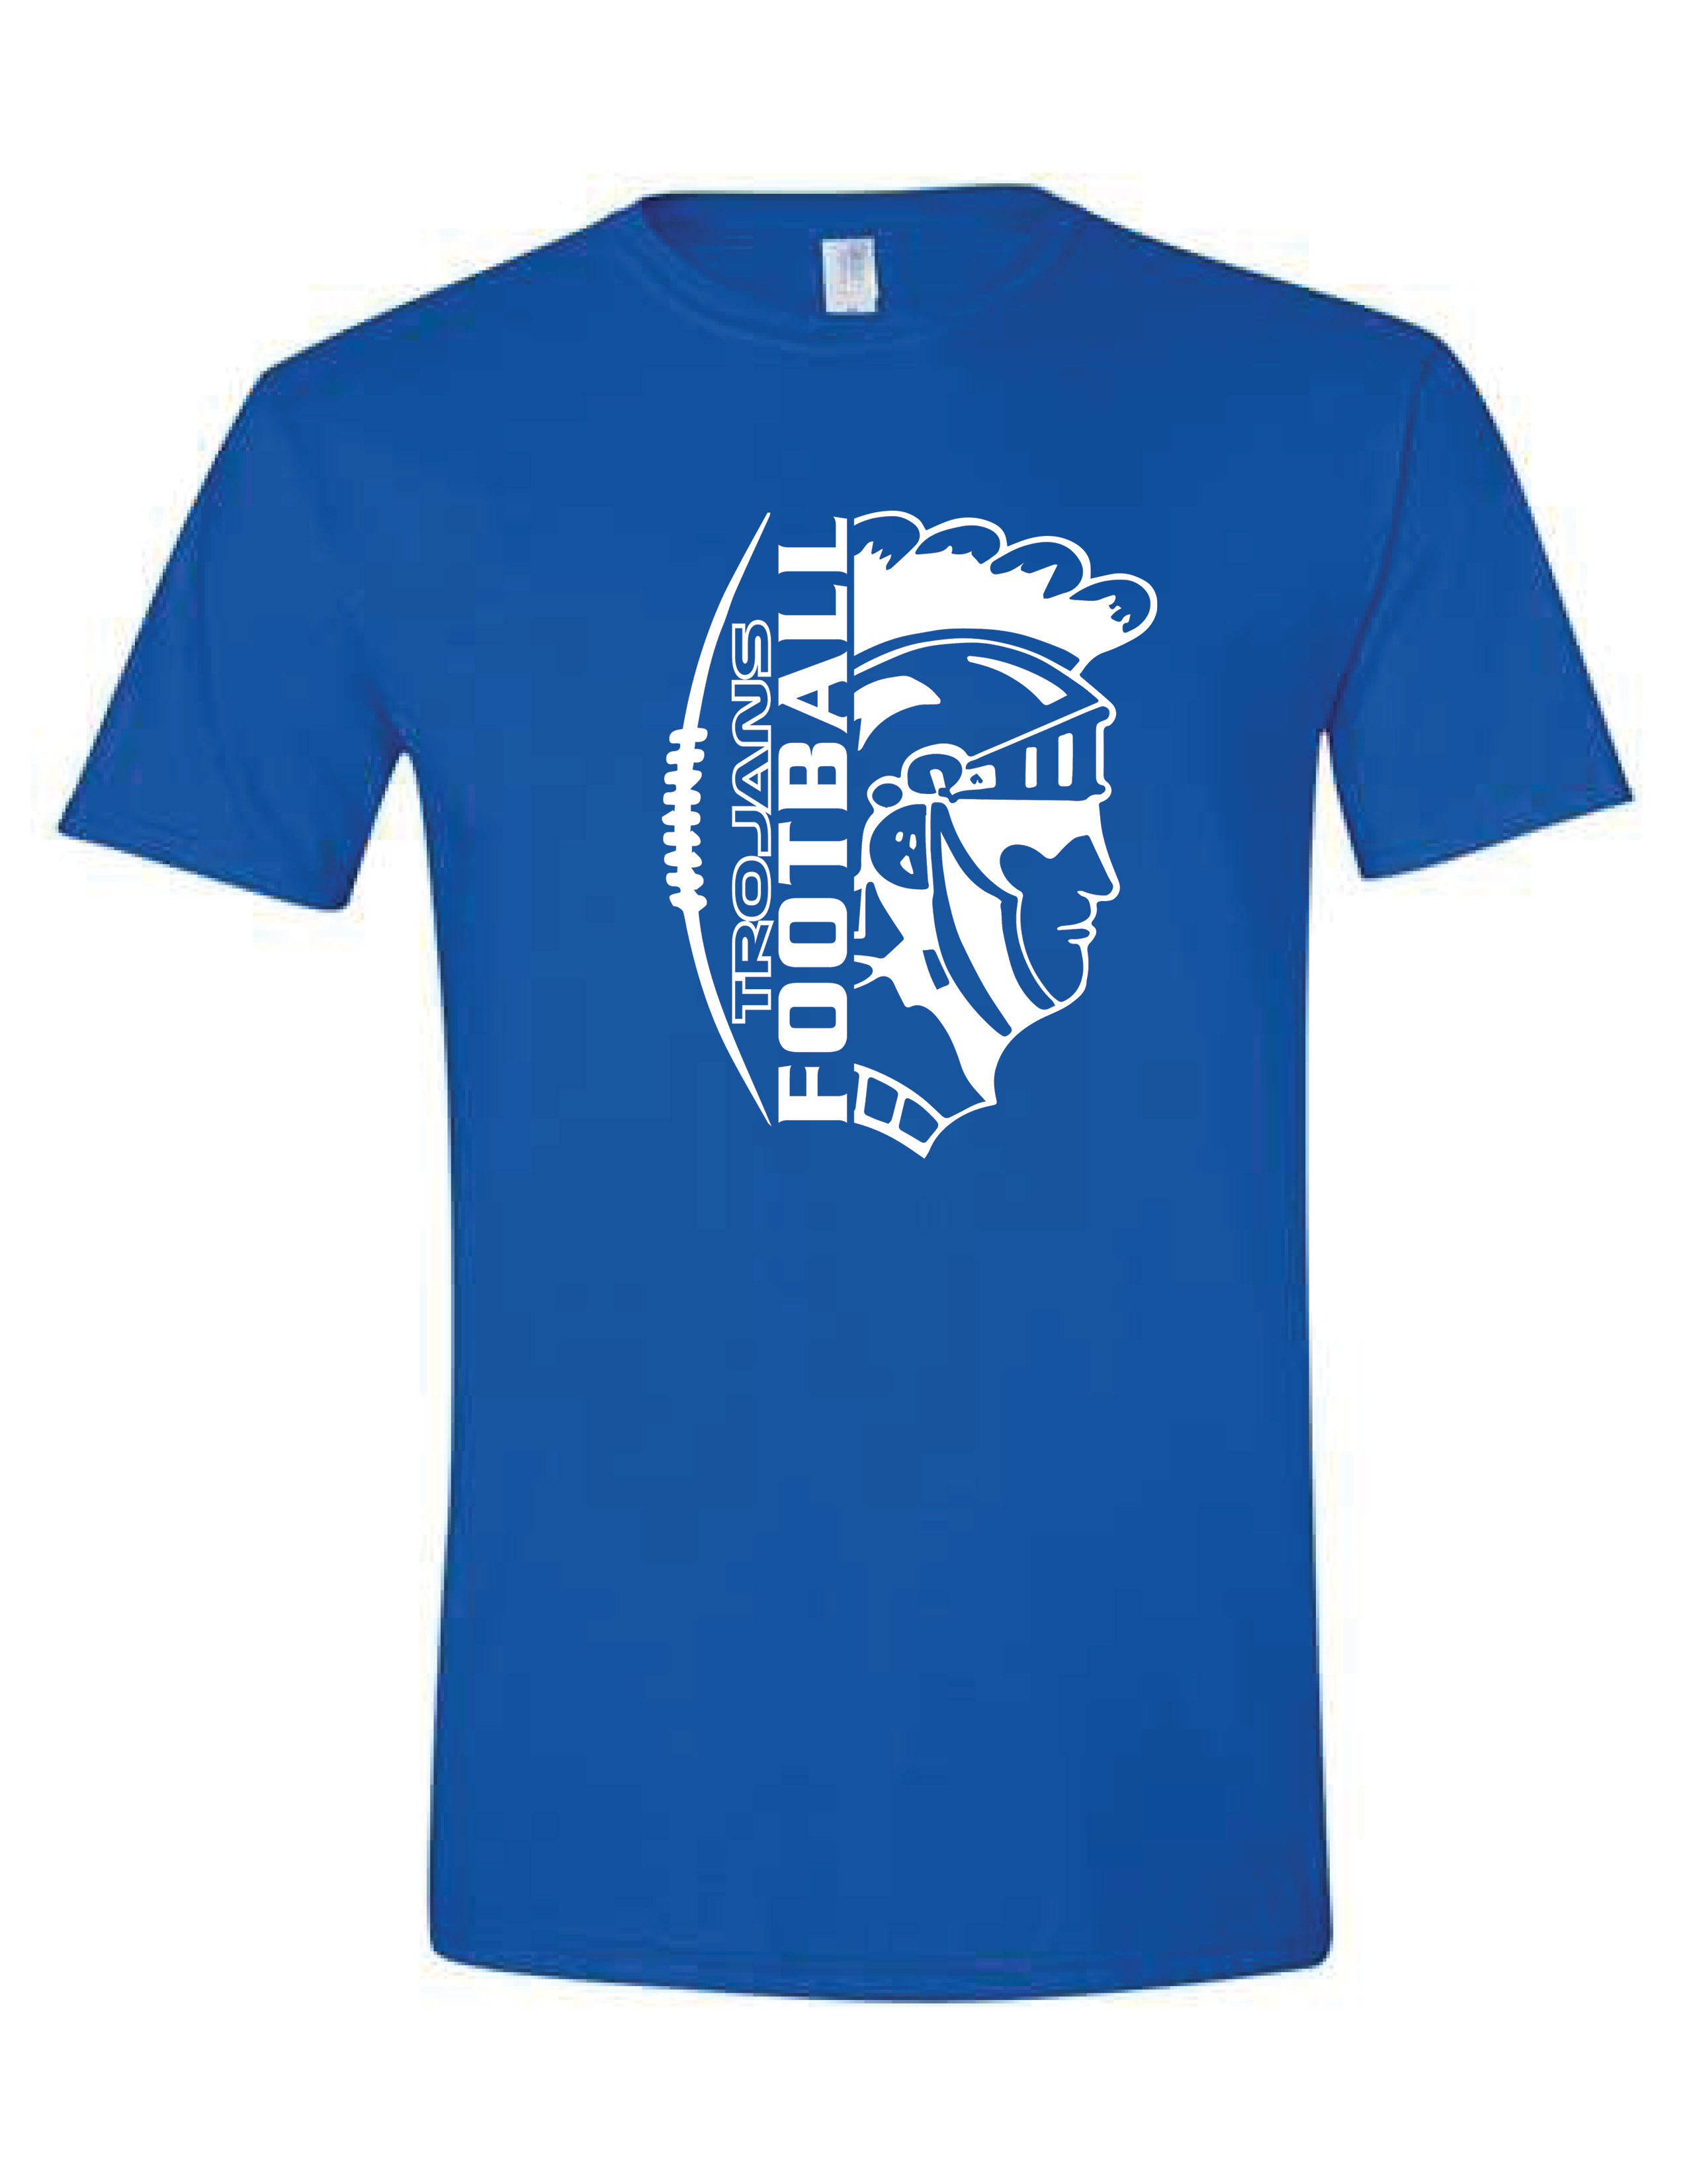 Short Sleeve T-shirt  (TROJAN) (Youth sizes available)